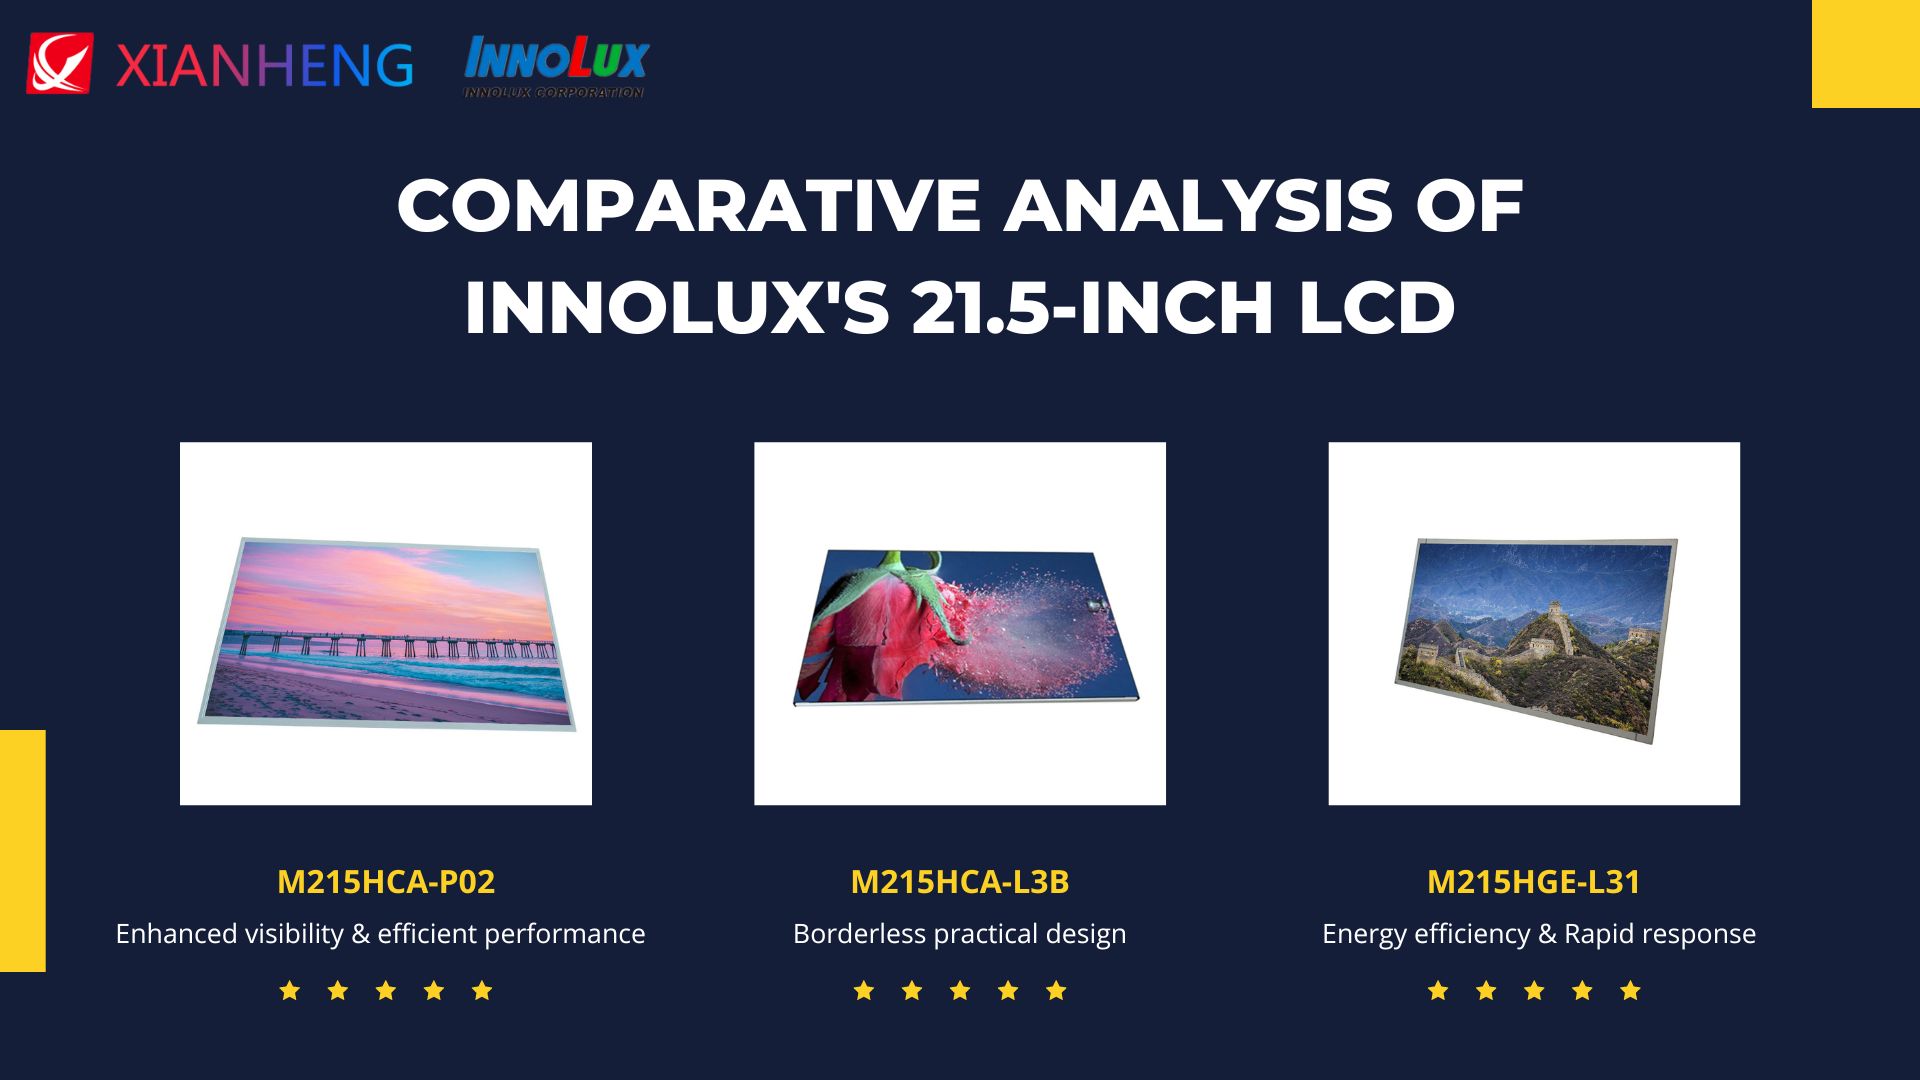 Deciphering Brilliance: Comparative Analysis of INNOLUX's 21.5-Inch LCD